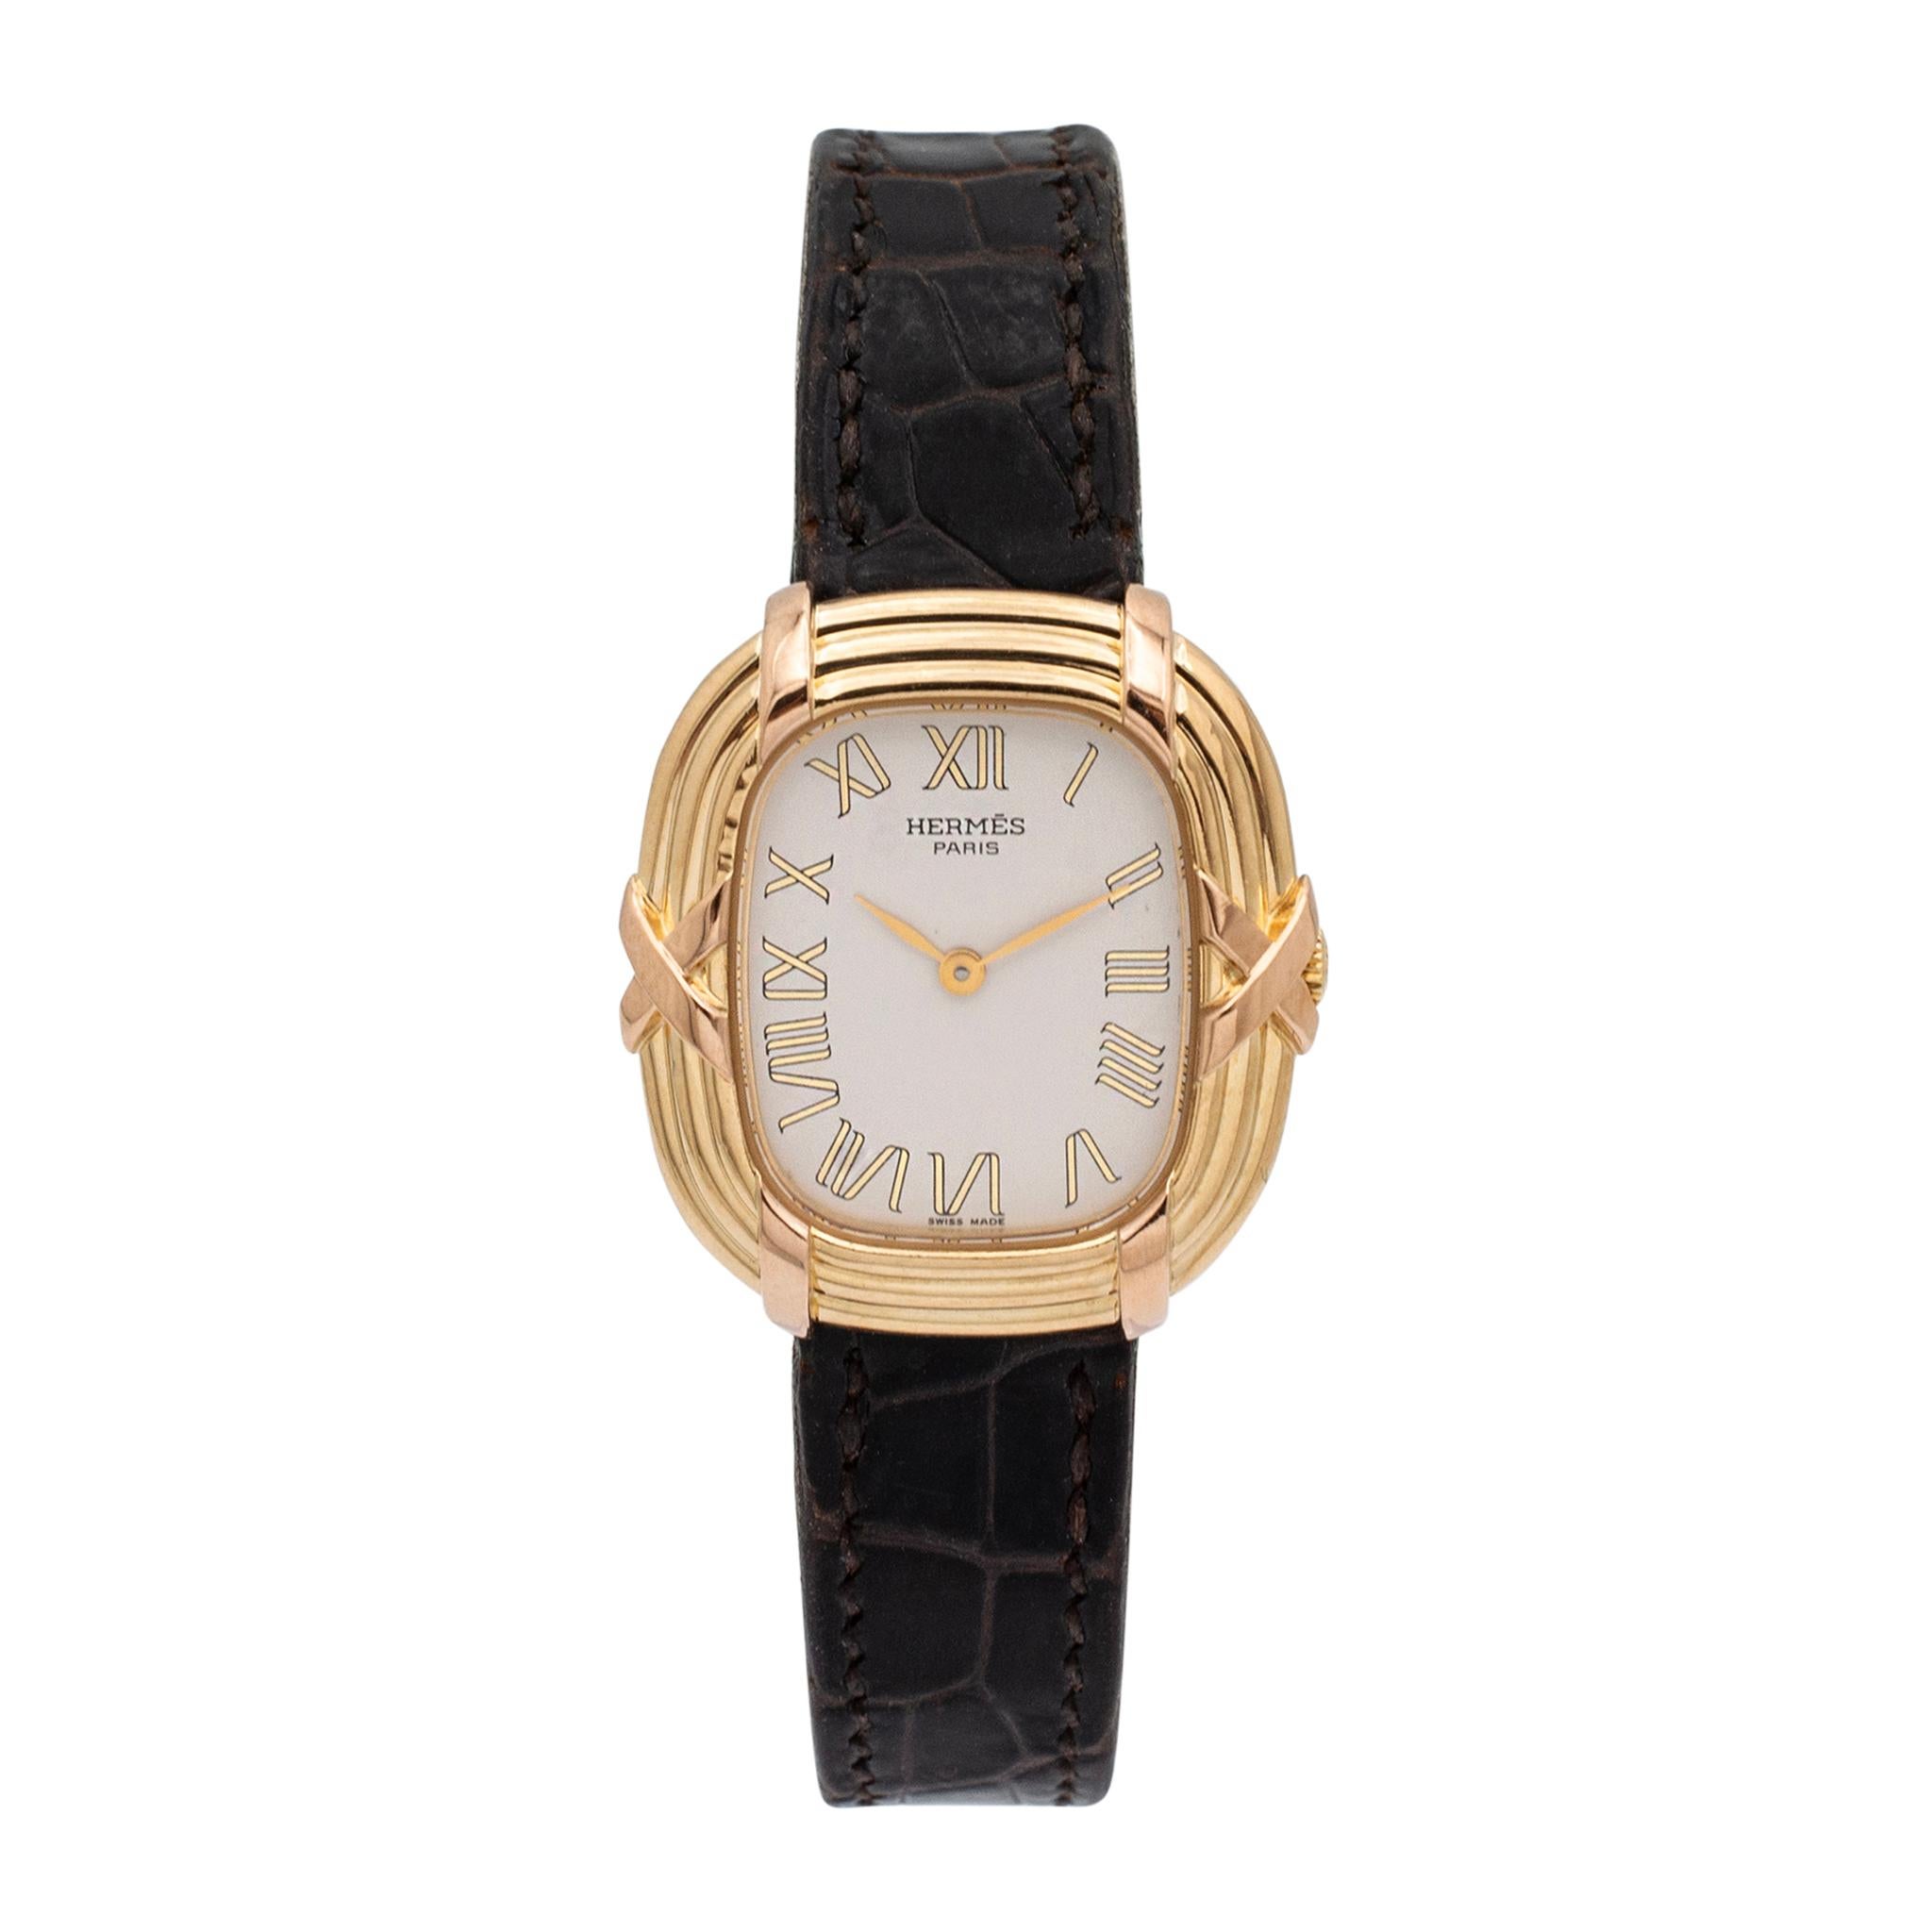 Brand: Hermes

Gender: Ladies

Metal Type: 18K Yellow Gold

Weight: 25.80 grams

Ladies 18K yellow gold HERMES Swiss made watch. The metal was tested and determined to be 18K yellow gold. Engraved with 